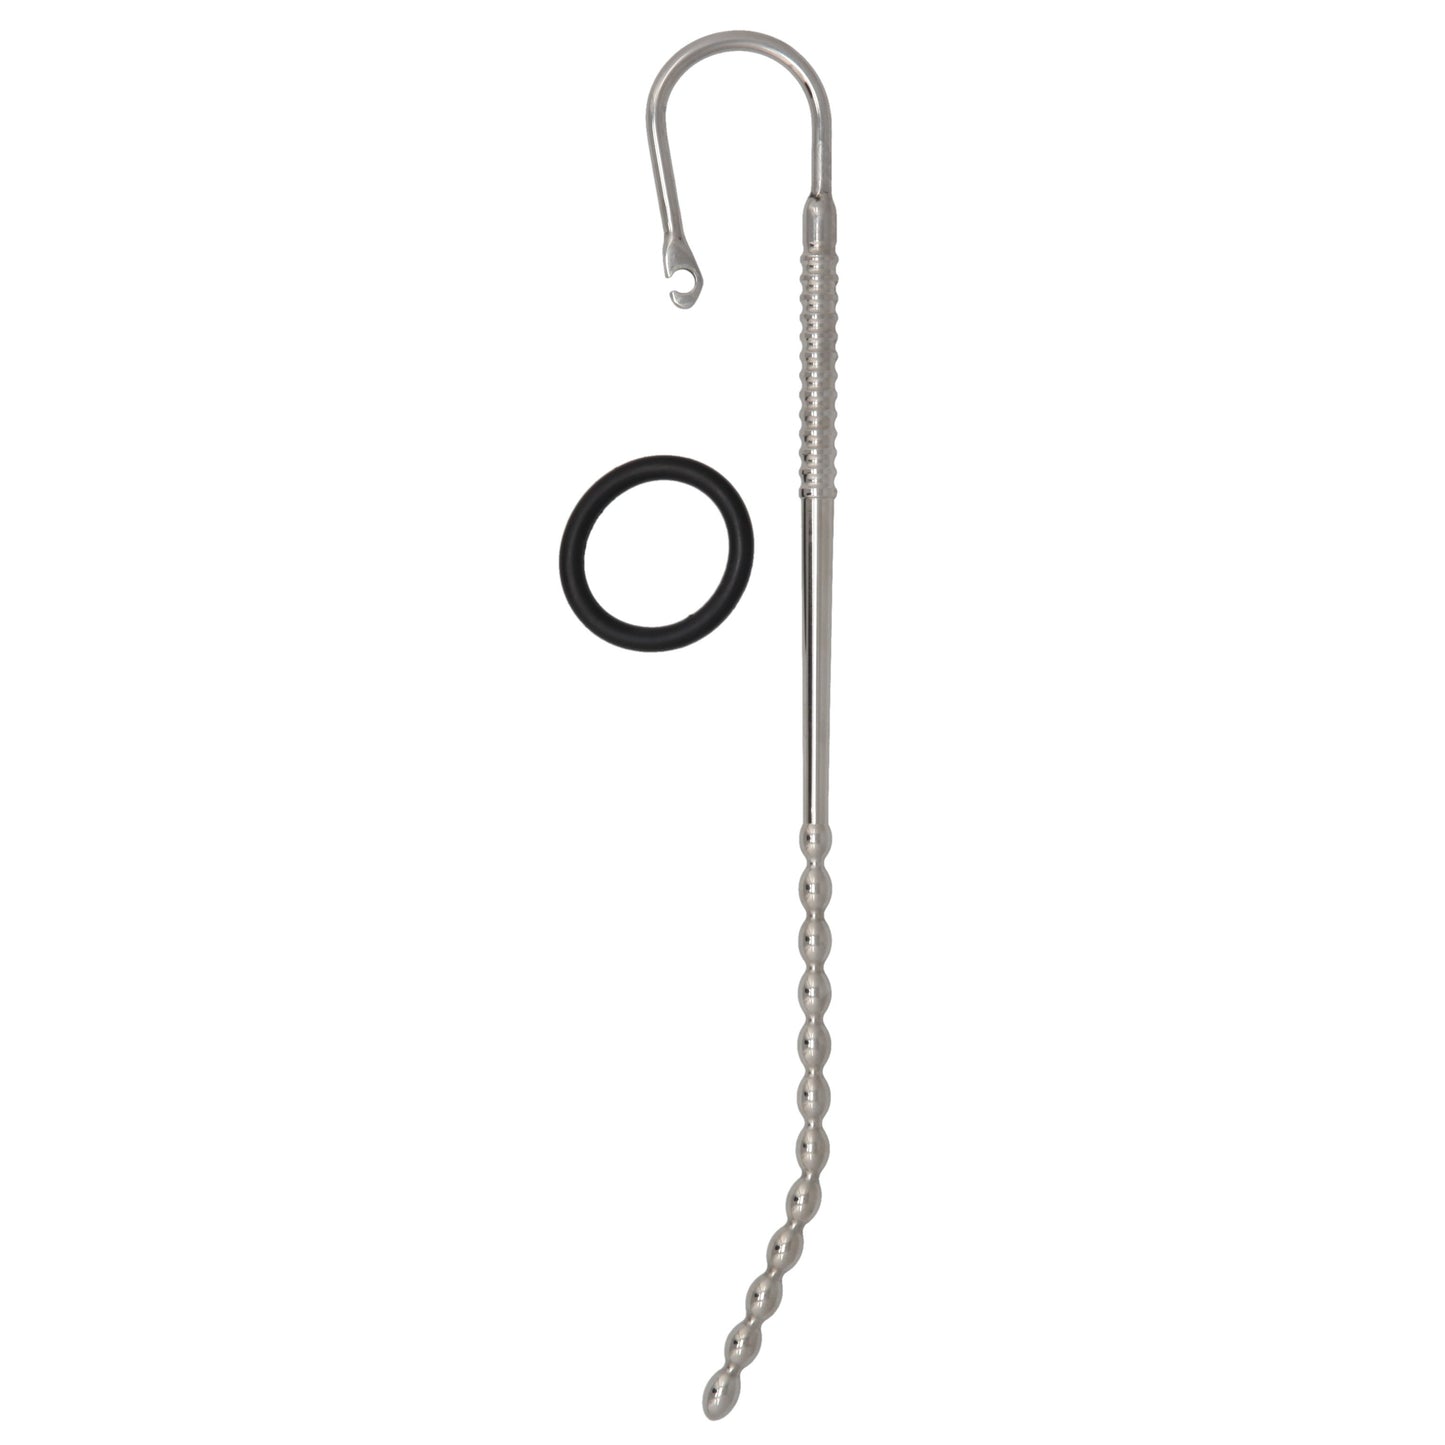 Curved Urethral Sounding Rod with Removable Glans Ring